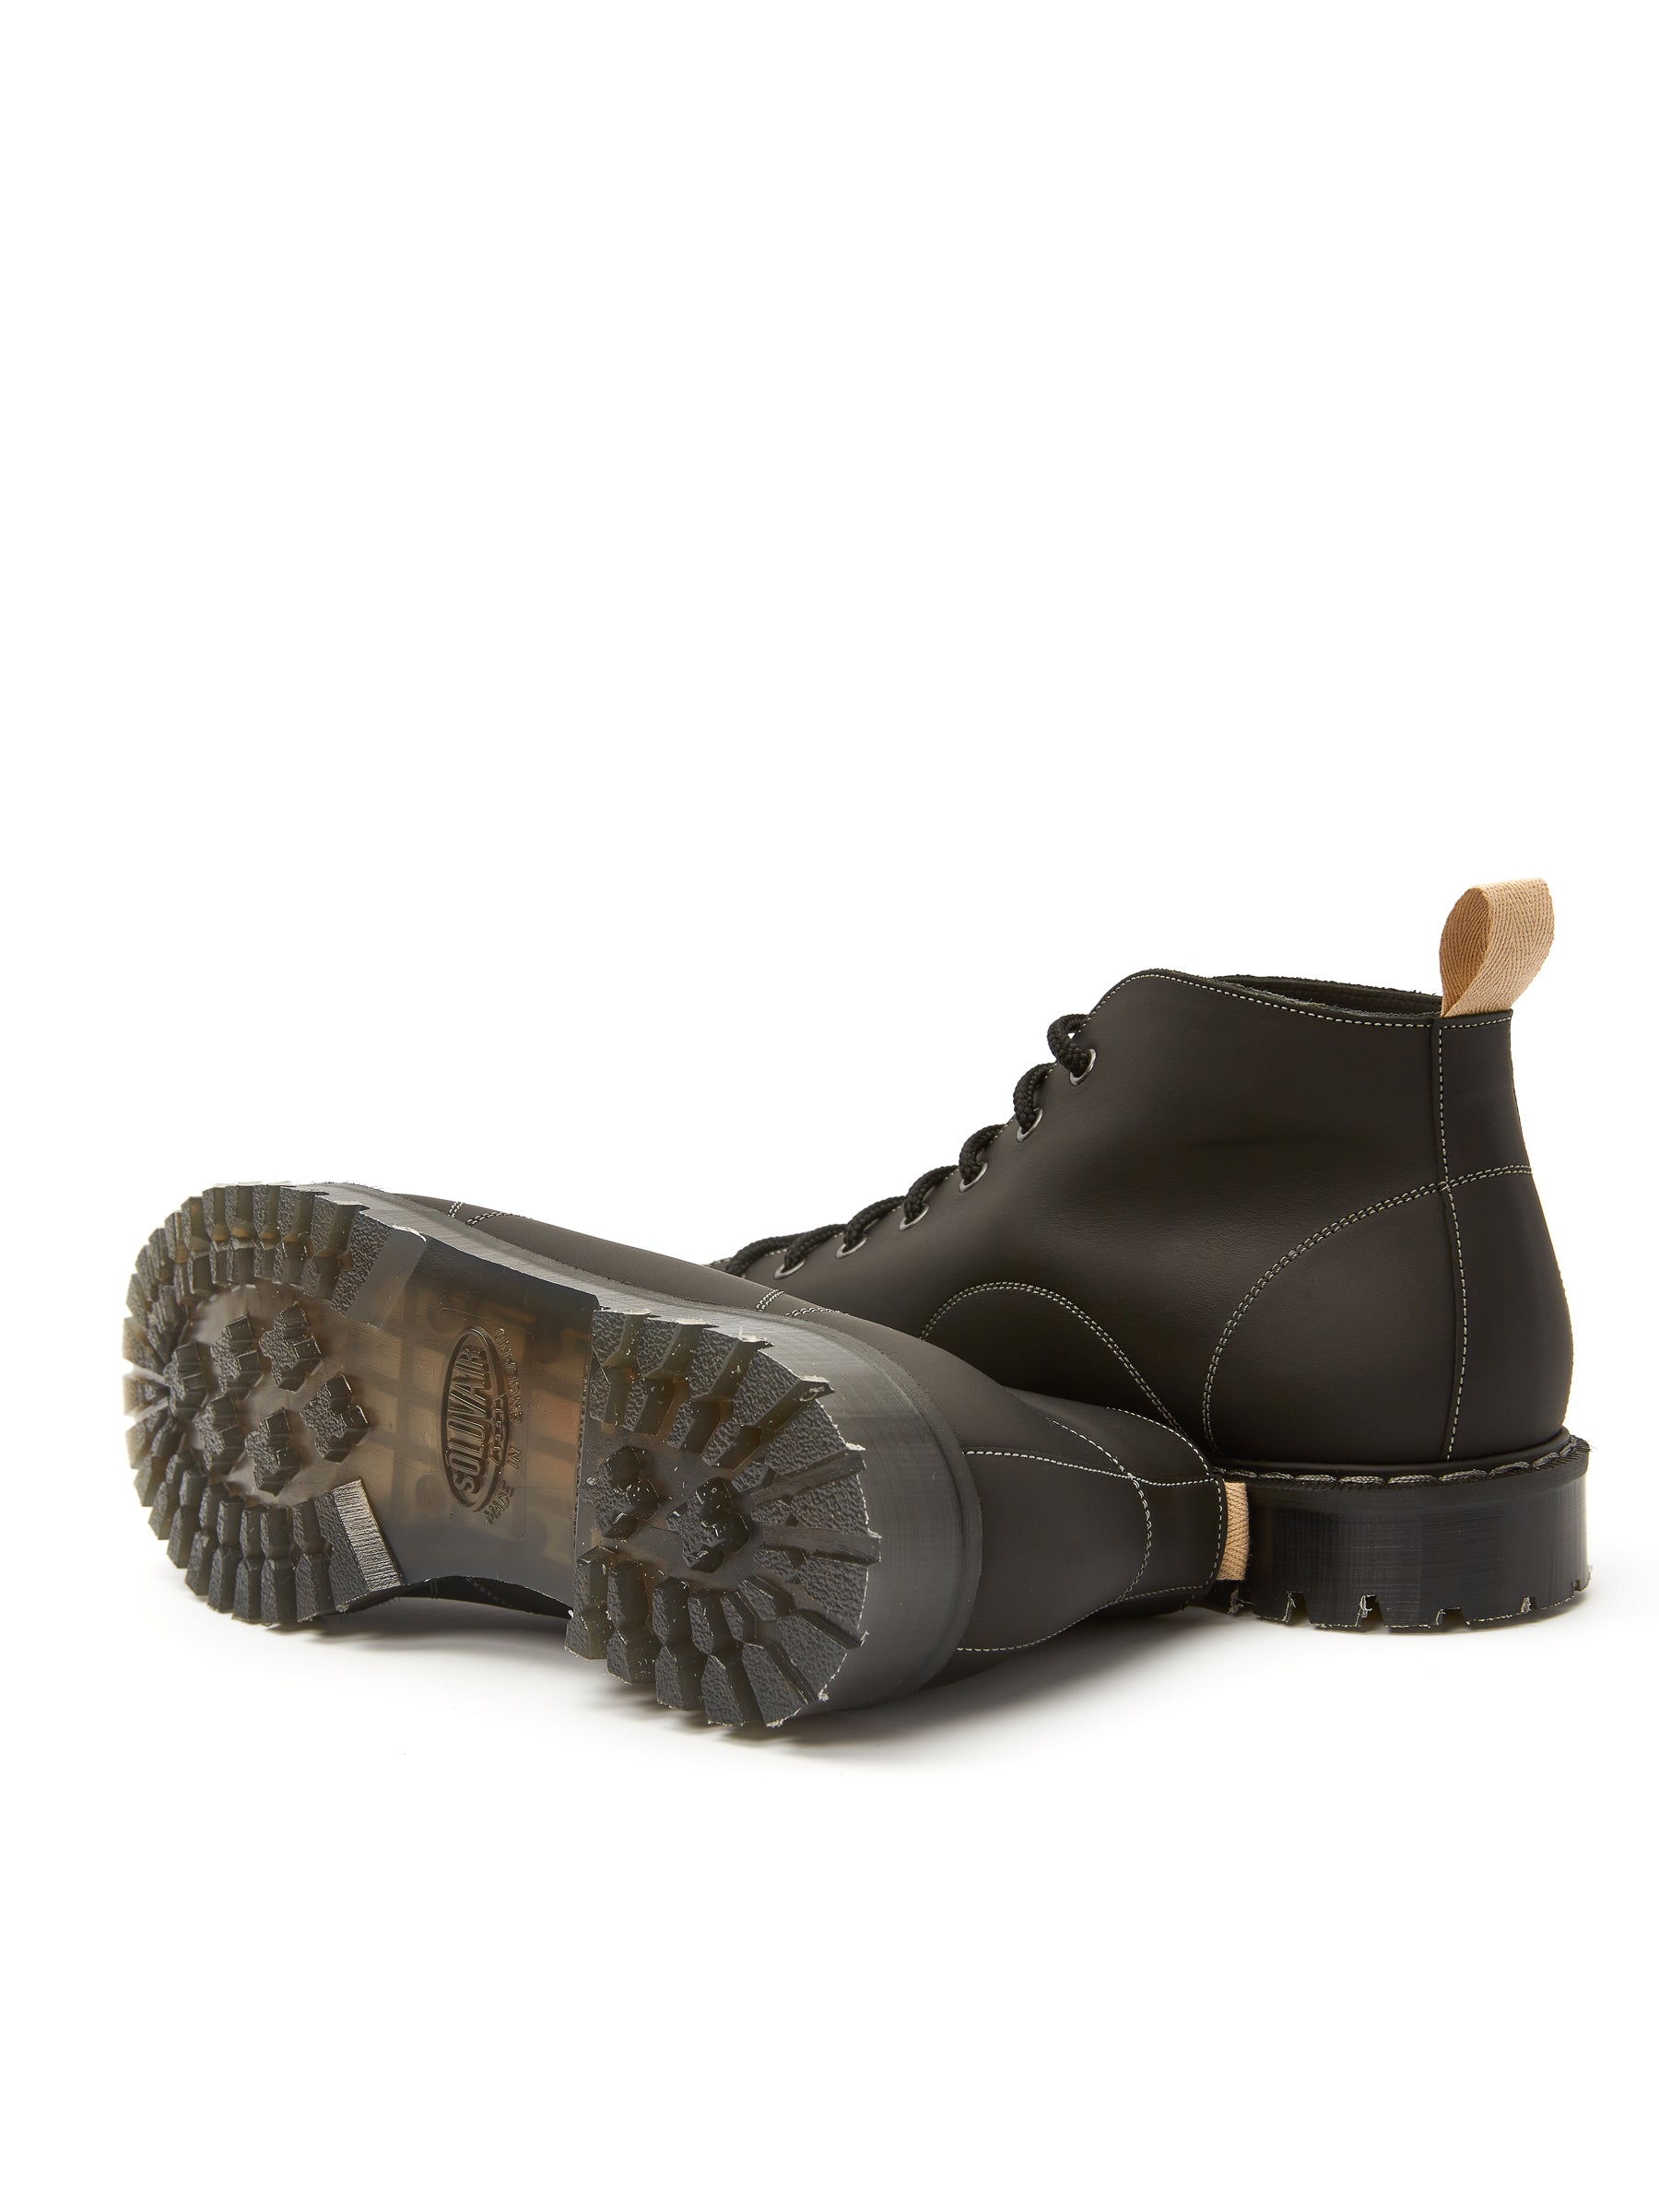 Solovair x Oliver Spencer Black Greasy Leather Monkey Boots